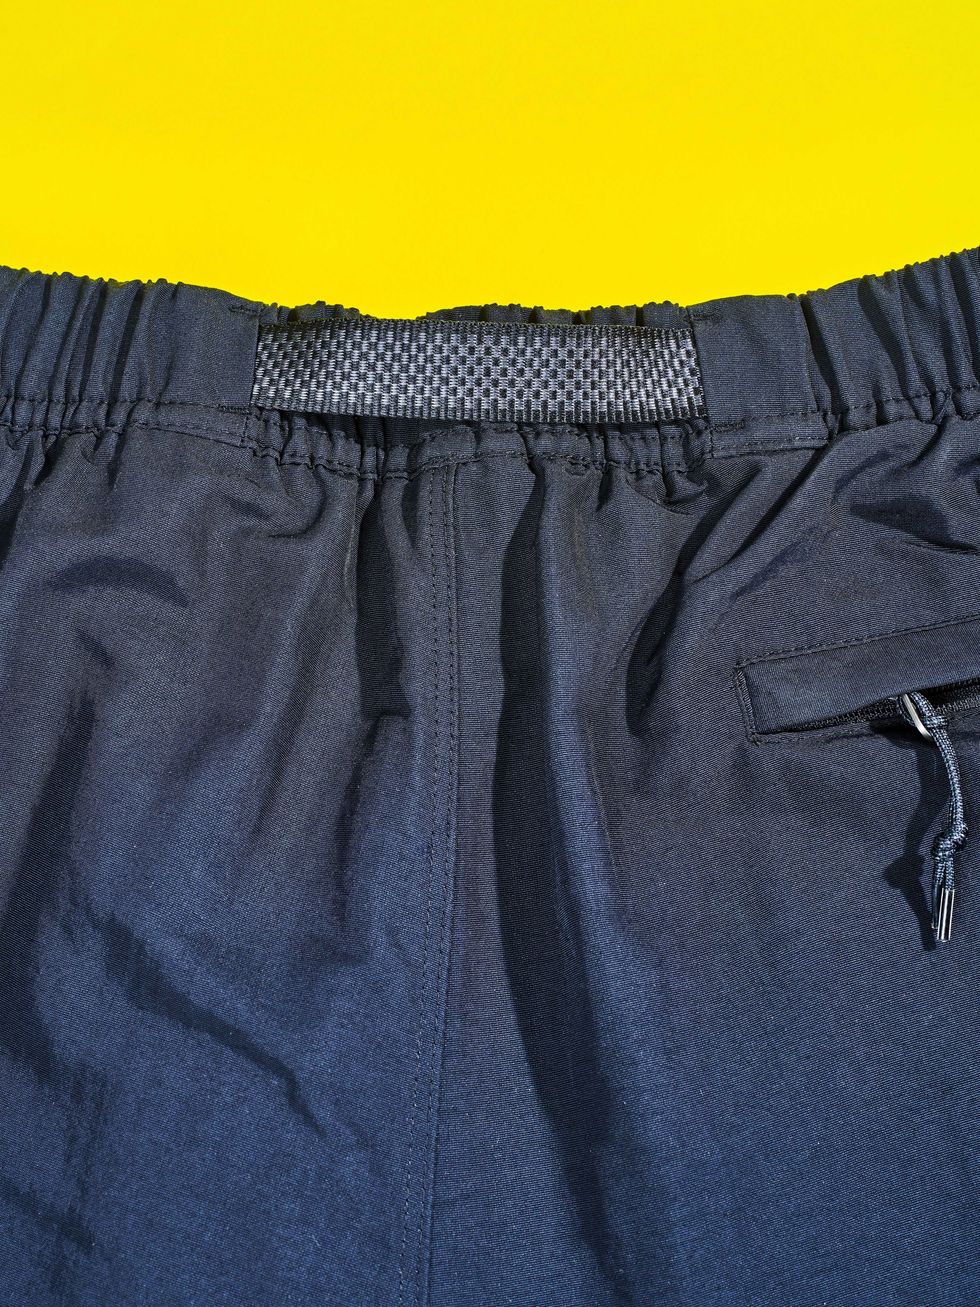 Nike ACG Trail Shorts Review, Endorsement, and Where to Buy